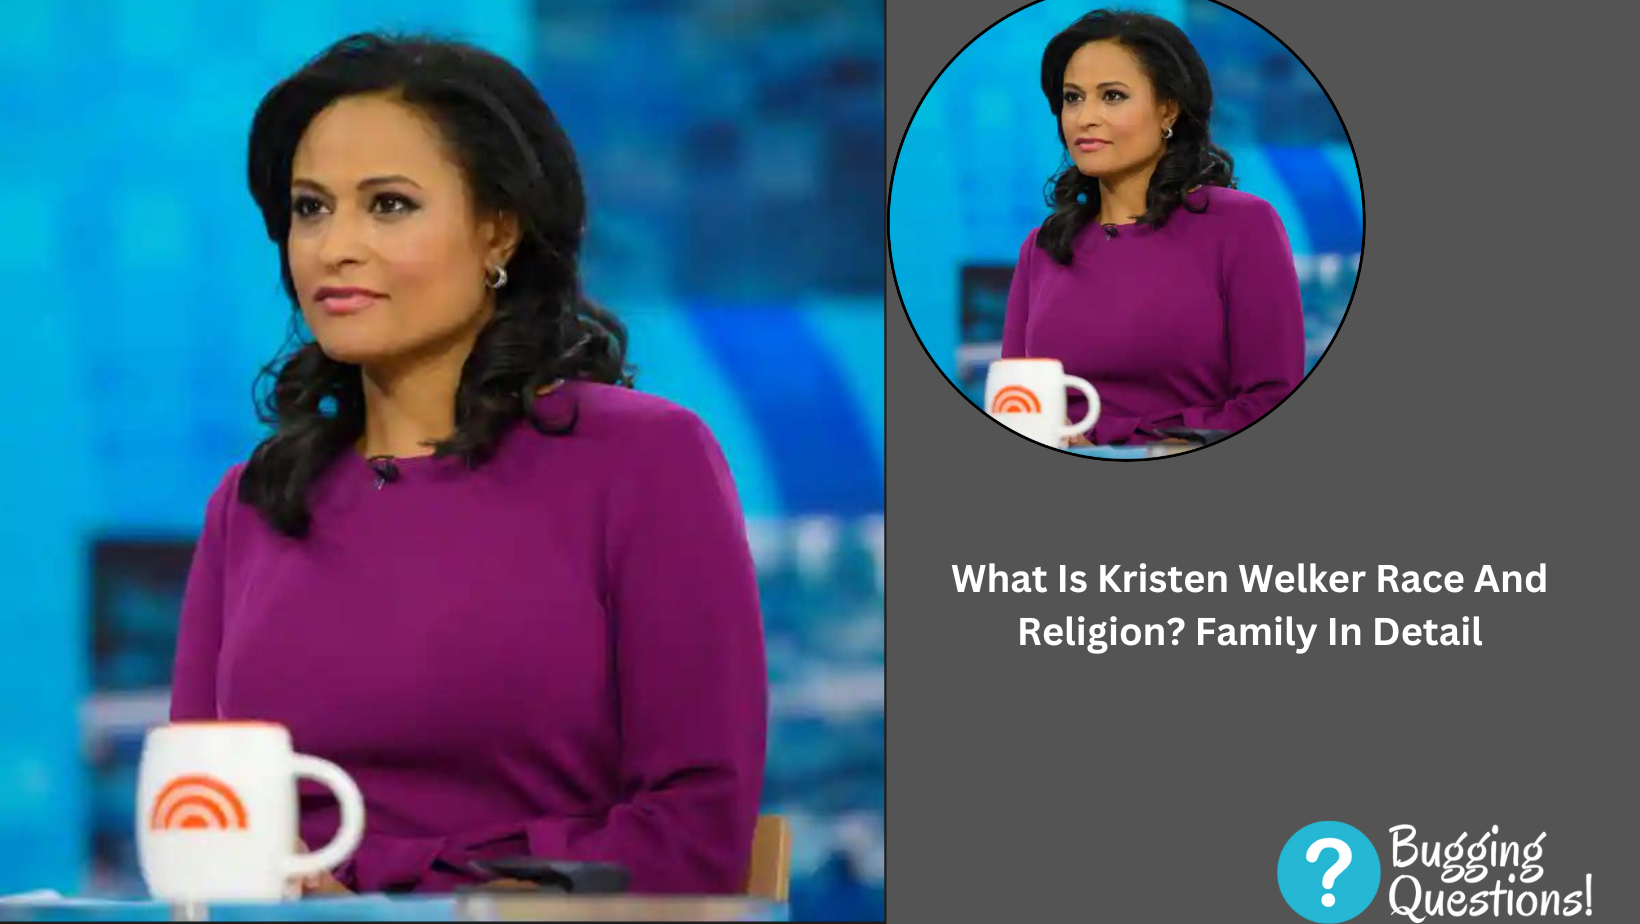 What Is Kristen Welker Race And Religion?